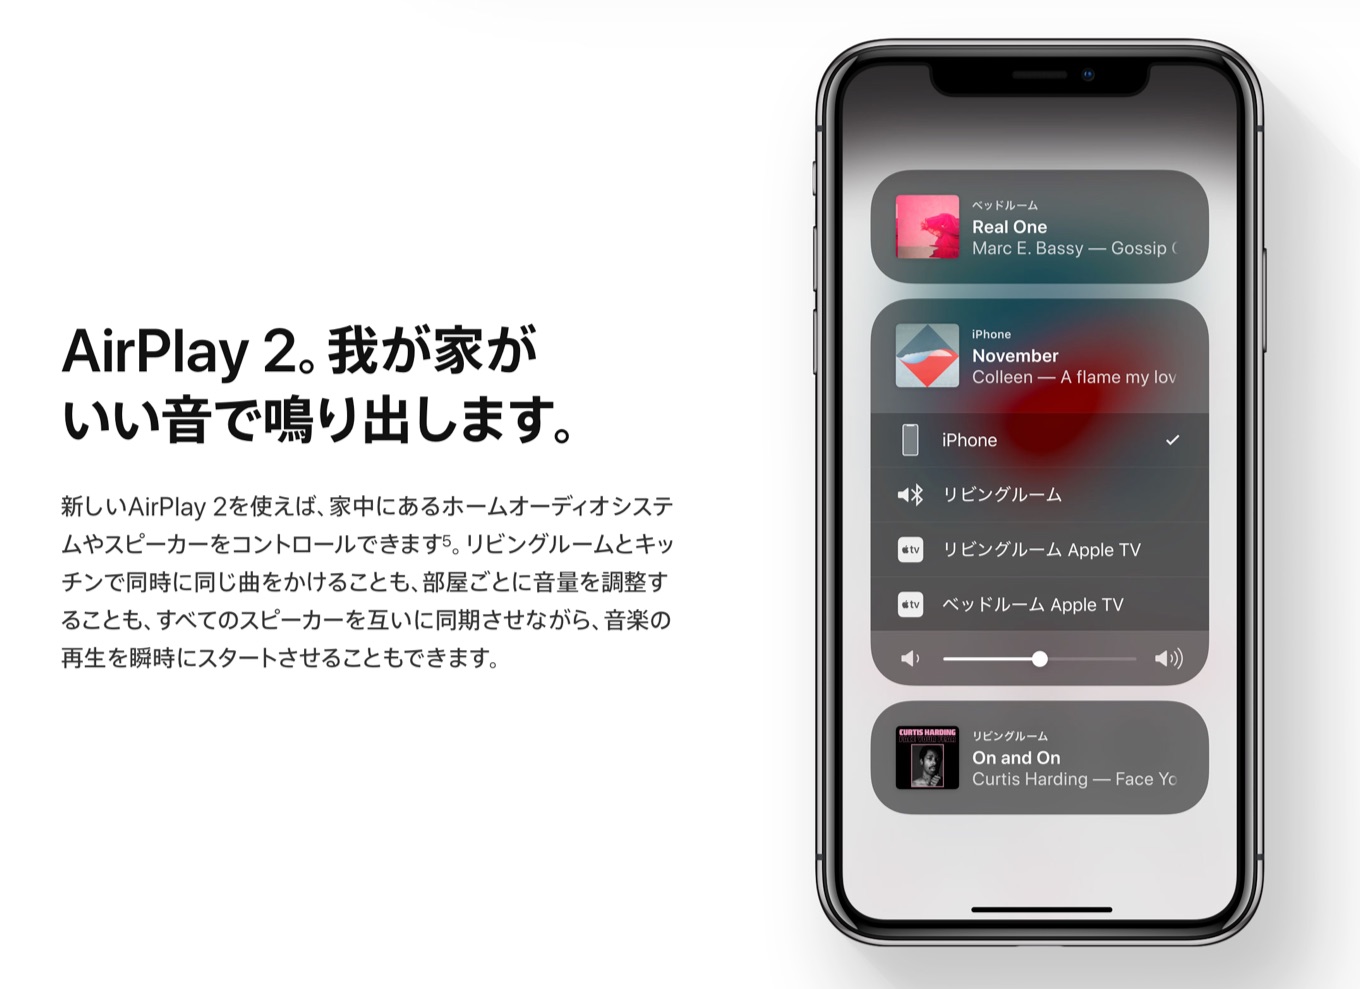 About AirPlay 2